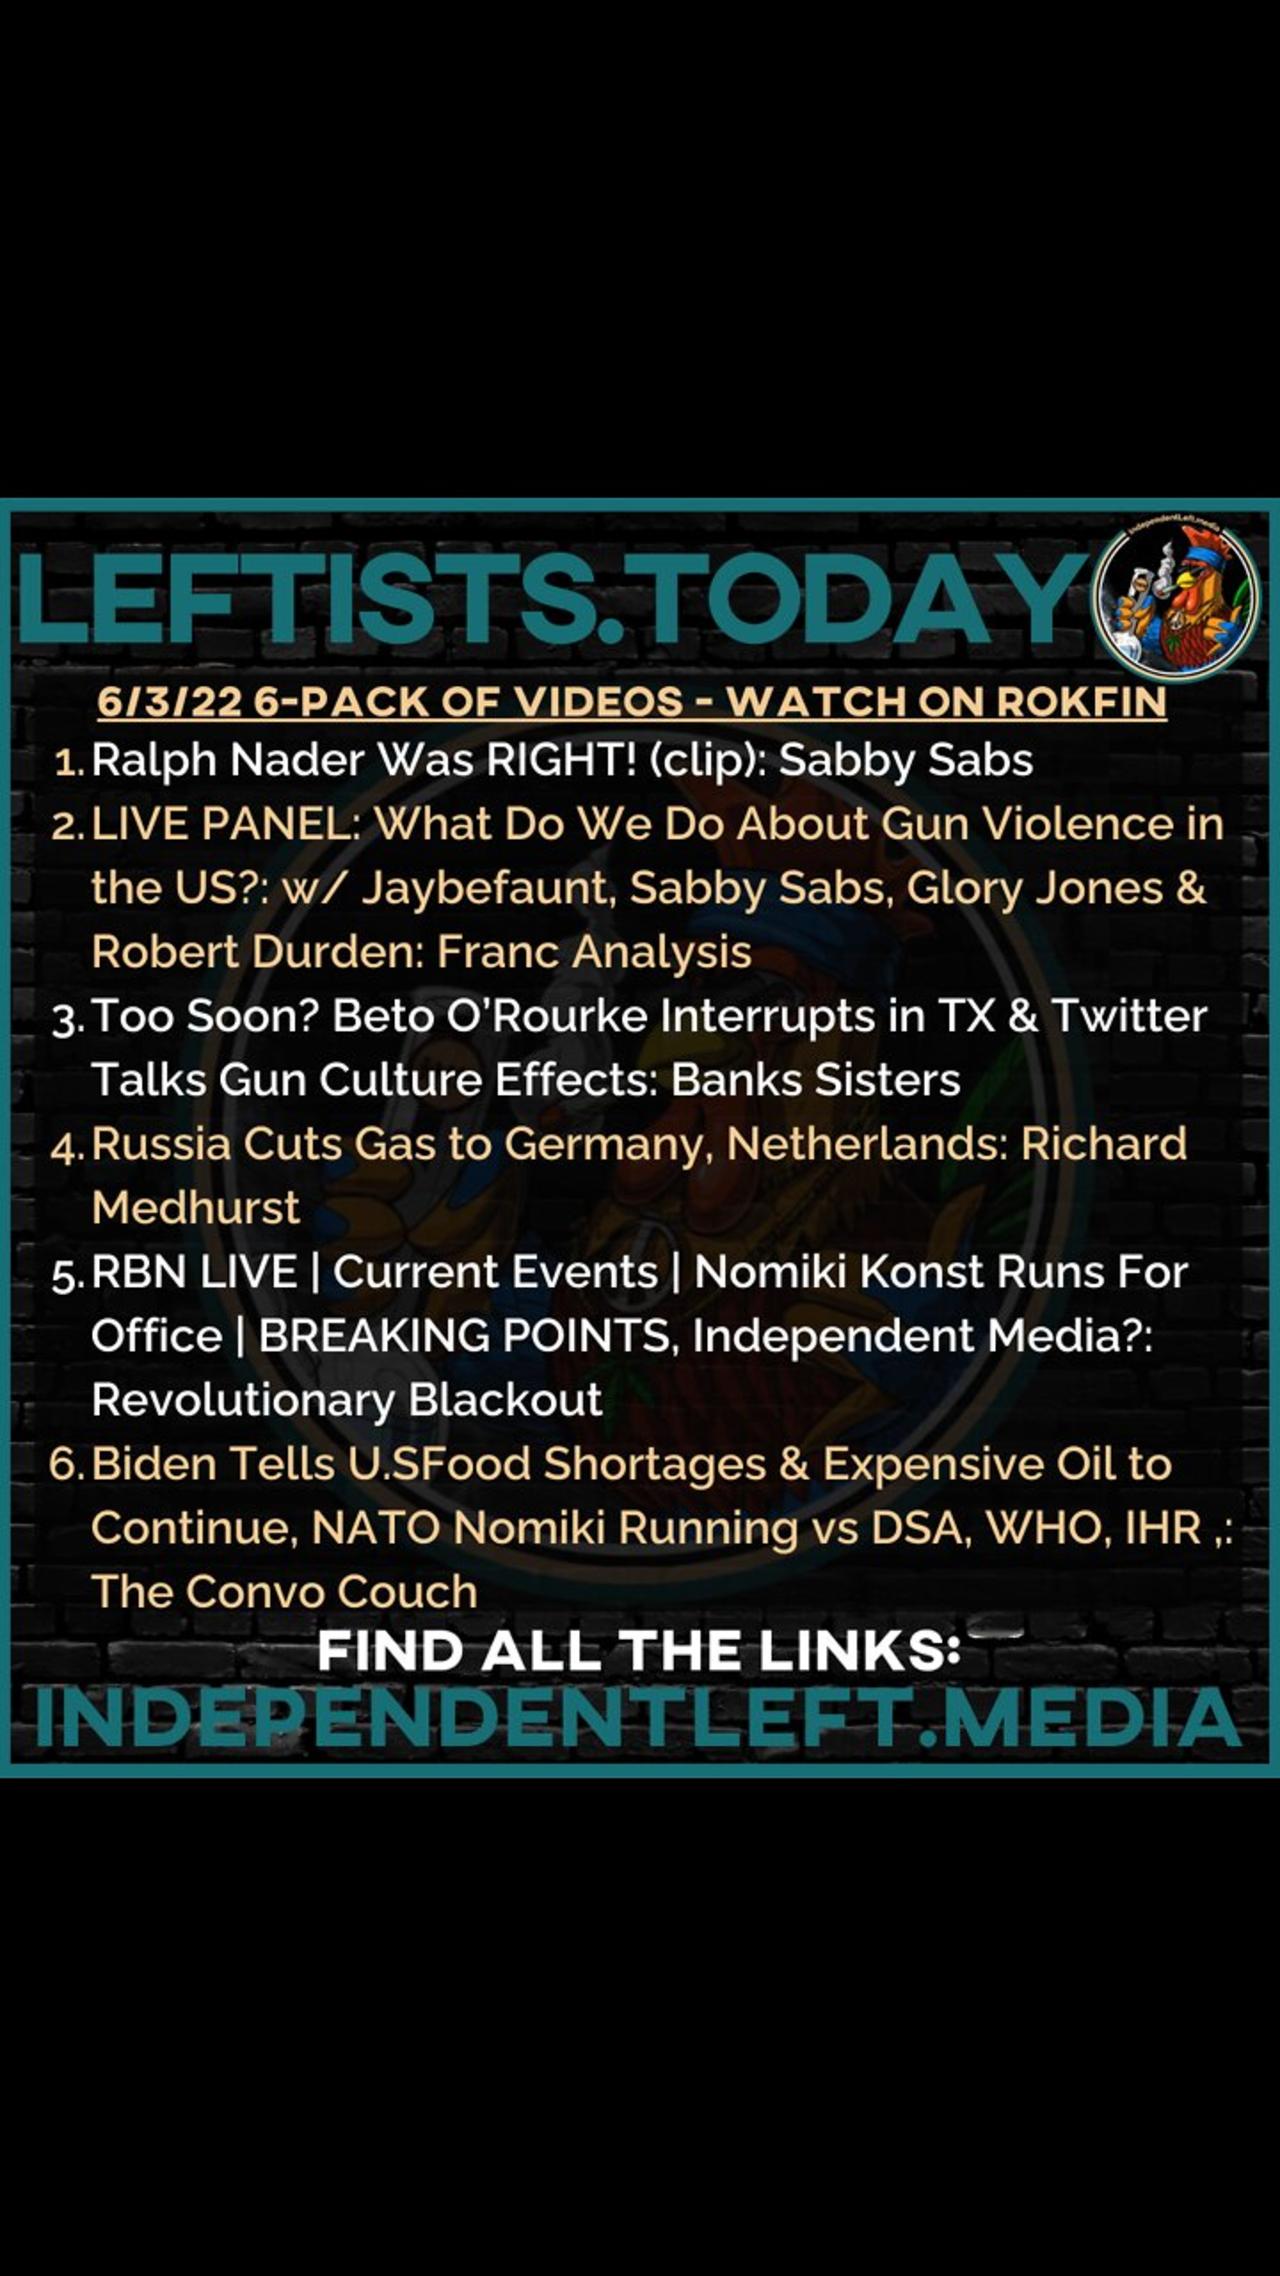 Ralph Nader Was RIGHT! | PANEL: What Do We Do About Gun Violence in the US? | 6/3 leftists.today